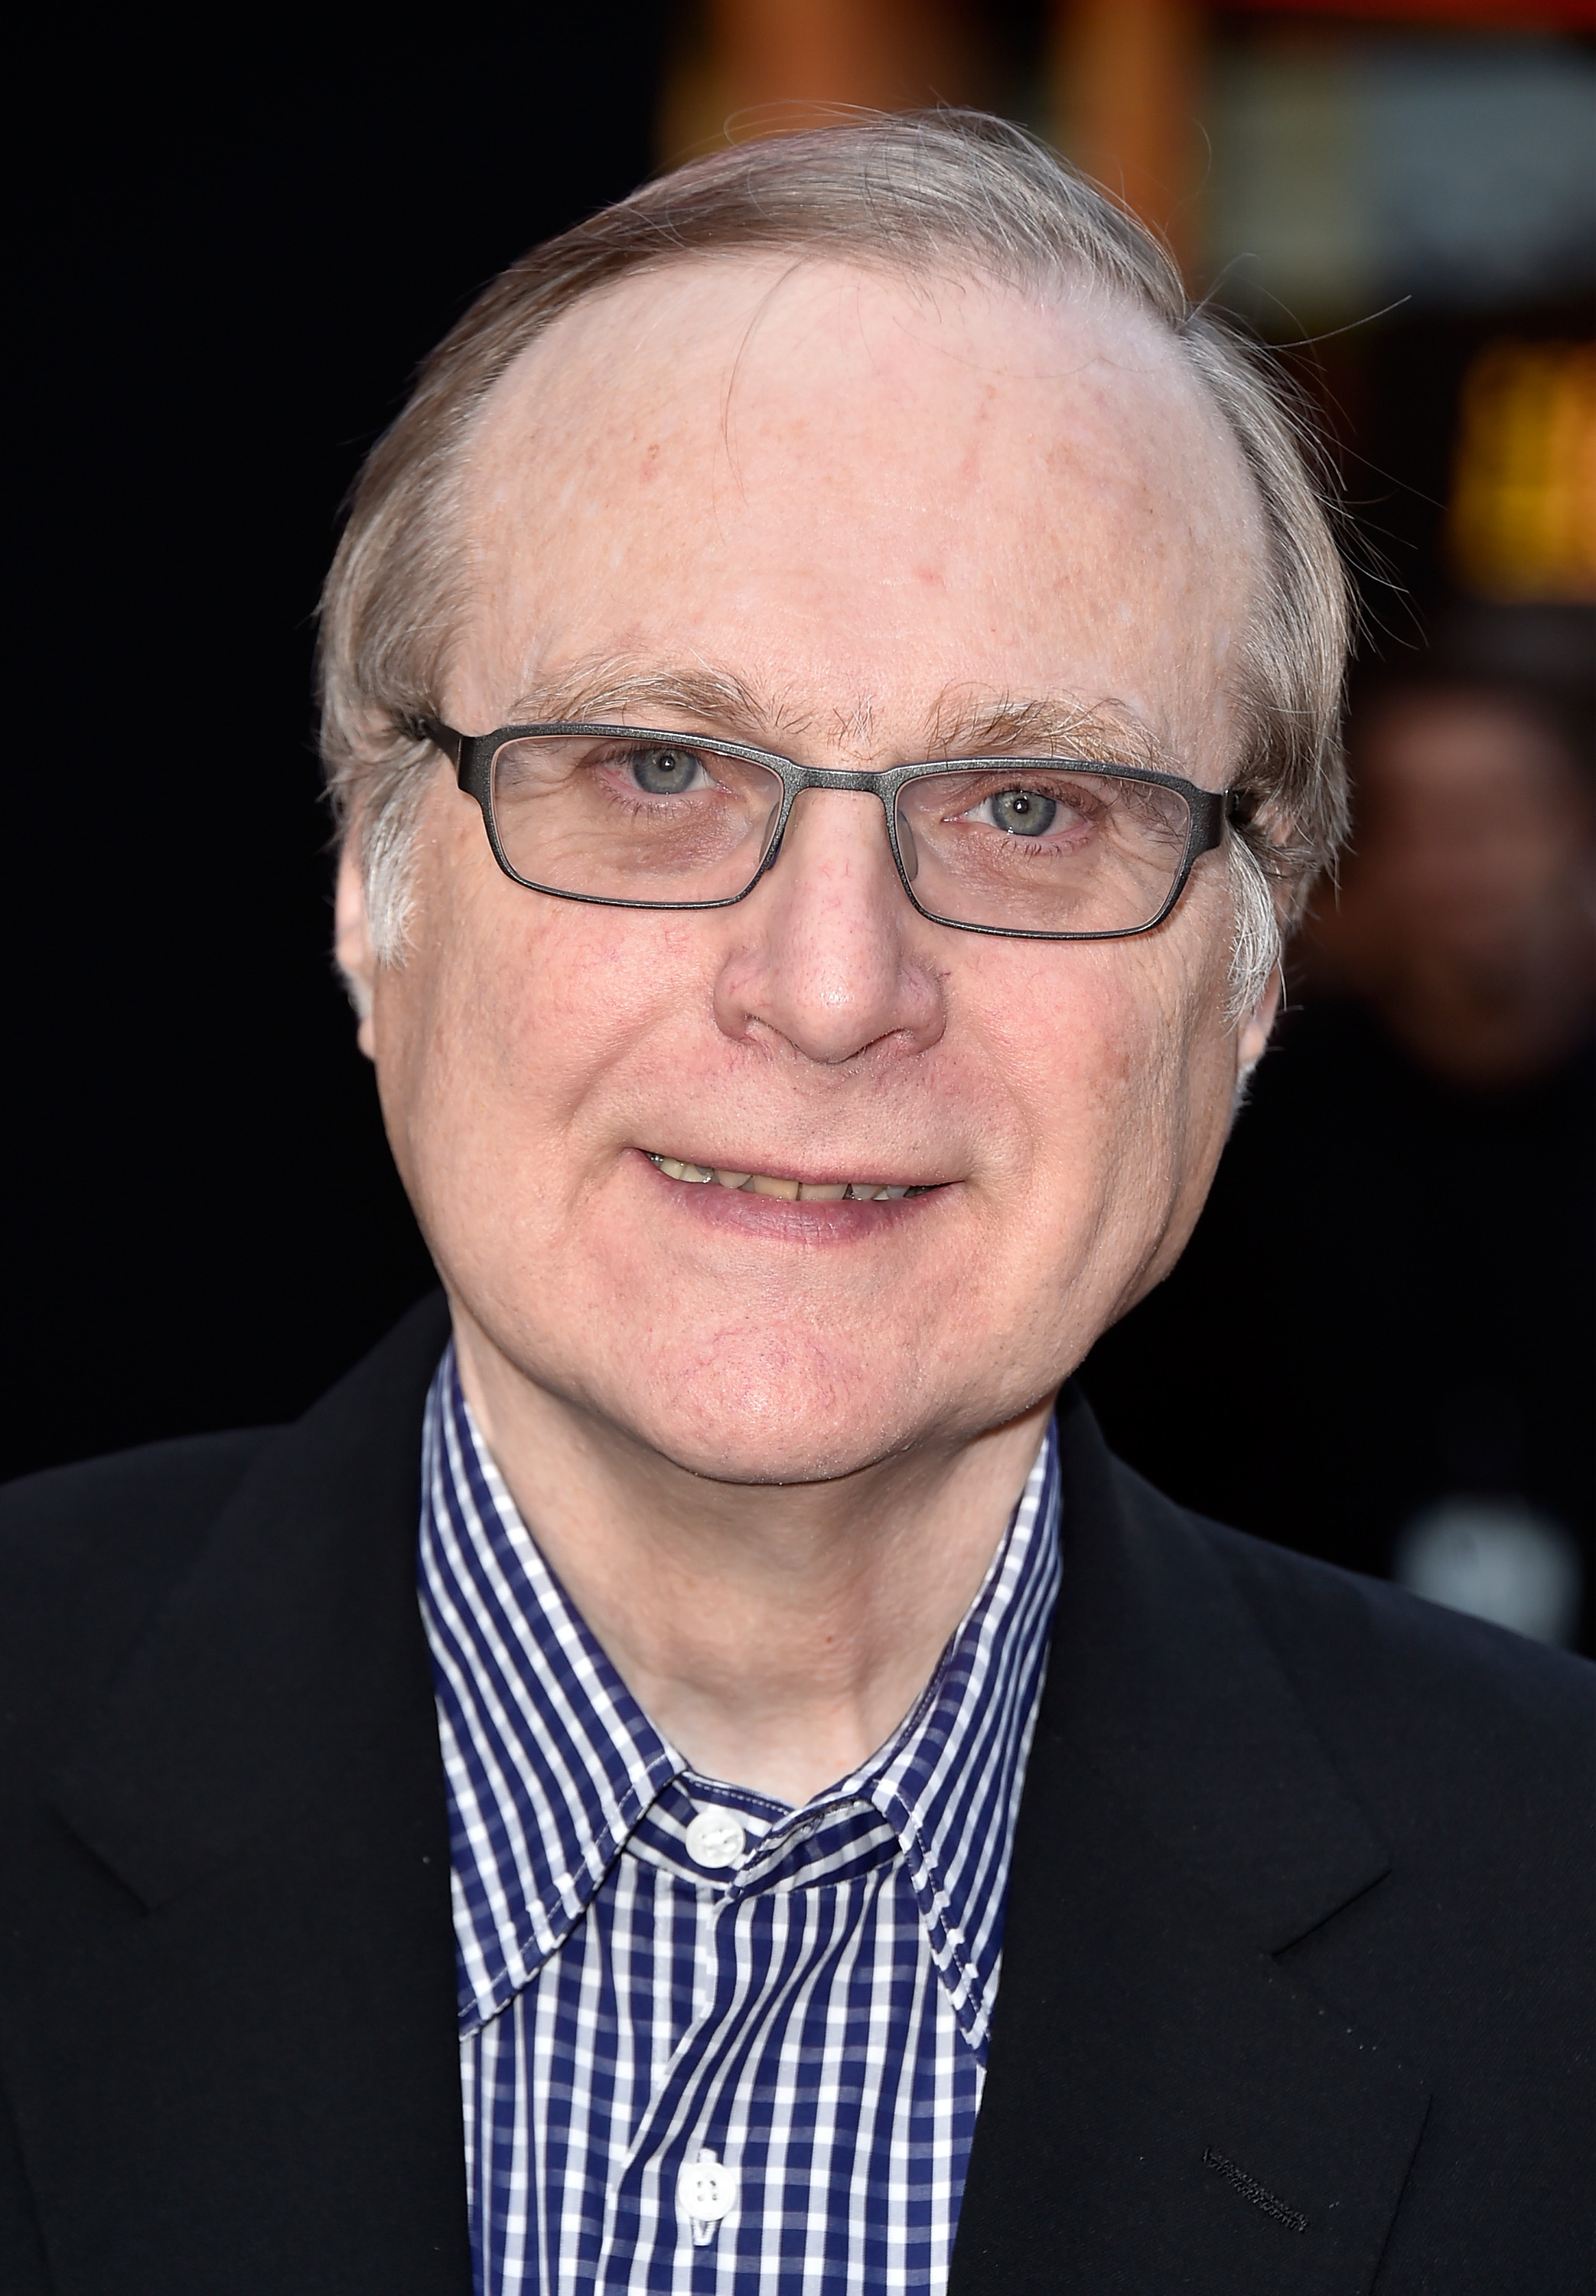 Co-founder of Microsoft Corporation Paul Allen attend the premiere of Paramount Pictures' "Interstellar" at TCL Chinese Theatre IMAX on October 26, 2014 in Hollywood, California. (Frazer Harrison—Getty Images)